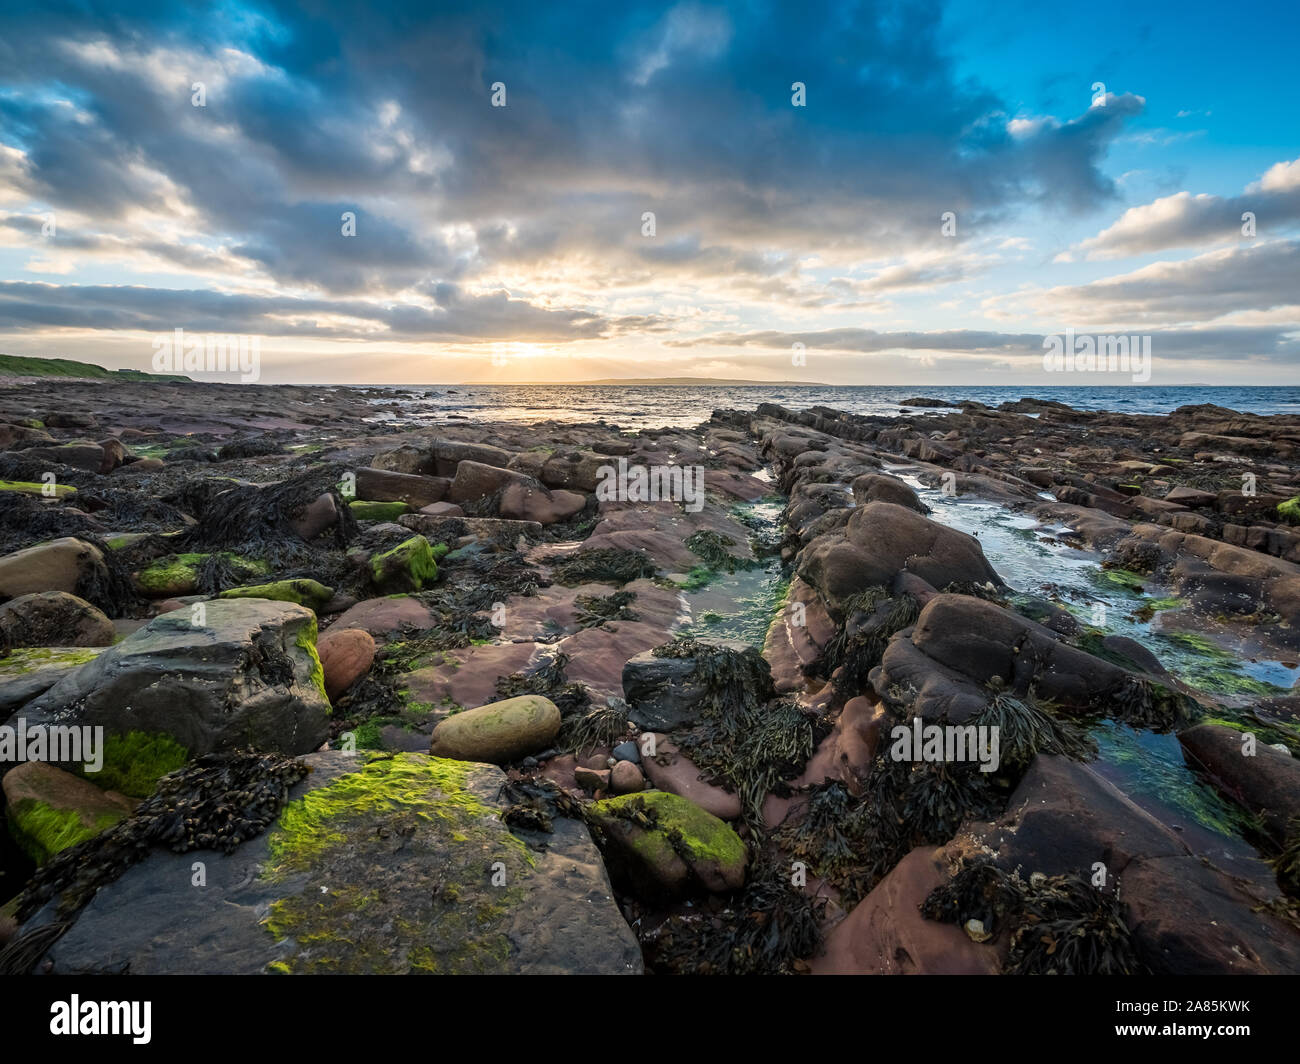 The rugged coastline from John O'Groats in the north of Scotland on a dusky sunset evening with the island of Stroma visible in the distance. Stock Photo